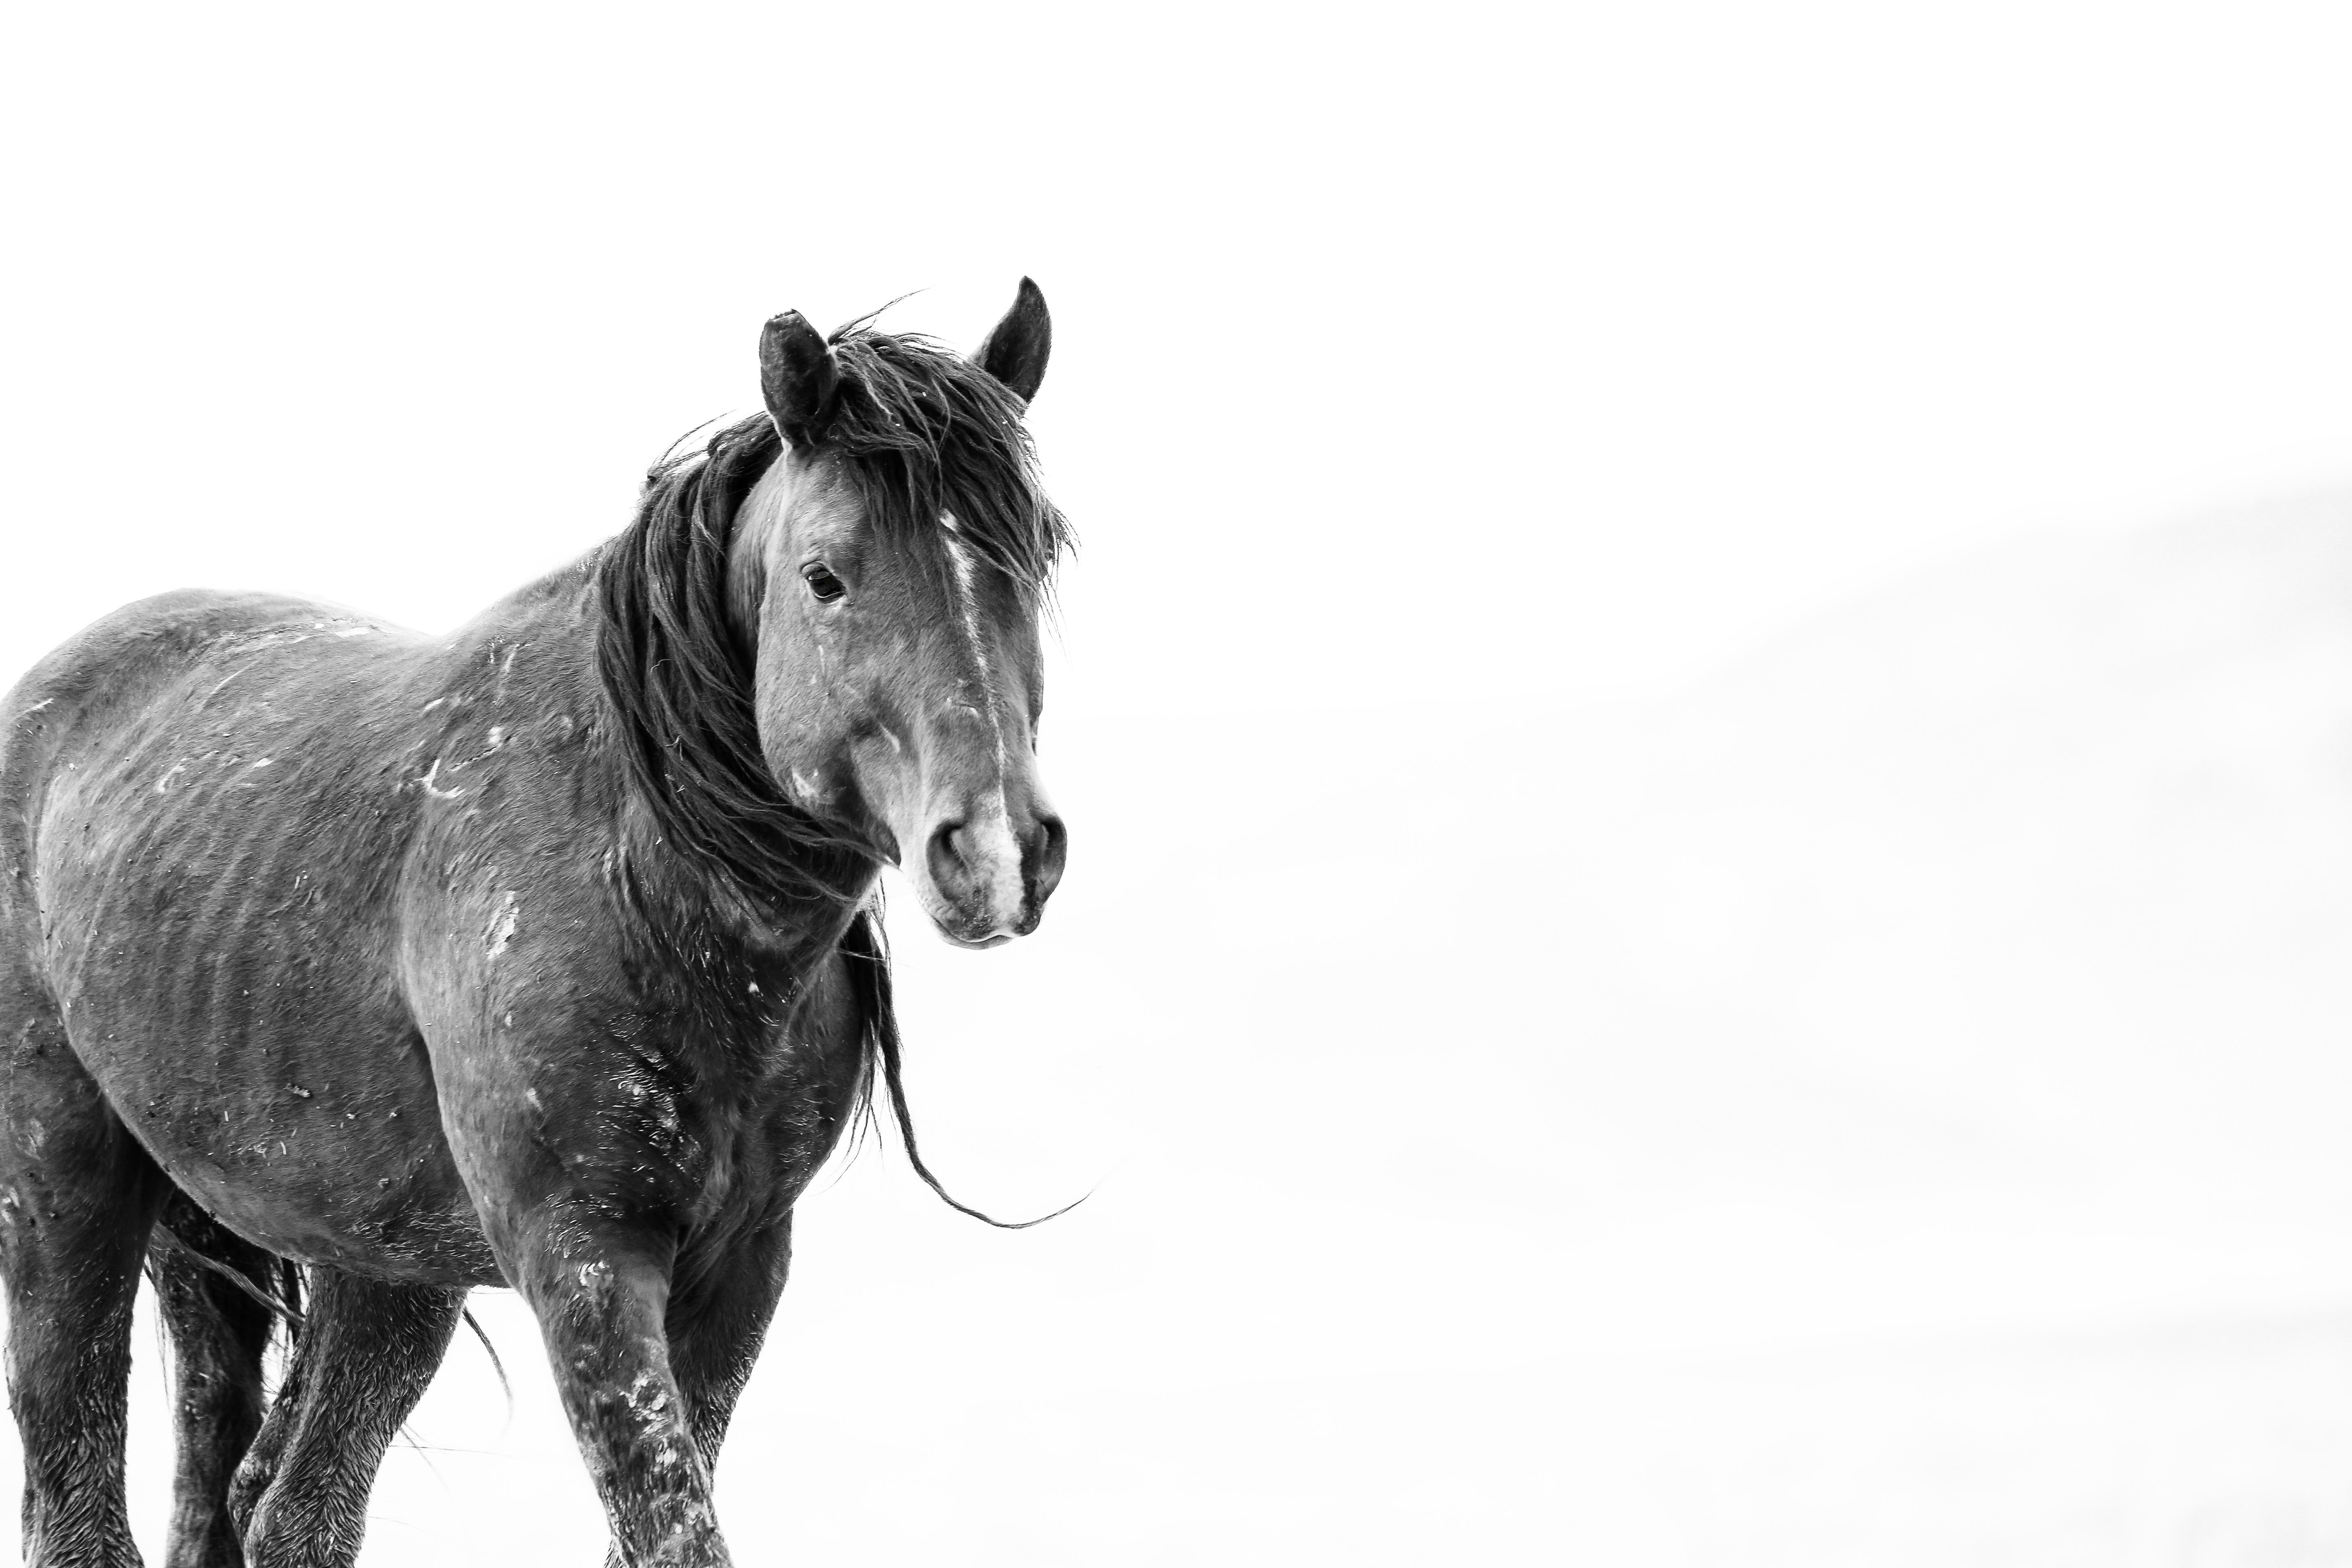 Shane Russeck Black and White Photograph - SOLO 36x48  Black & White Photography, Wild Horses Mustang Photograph ART